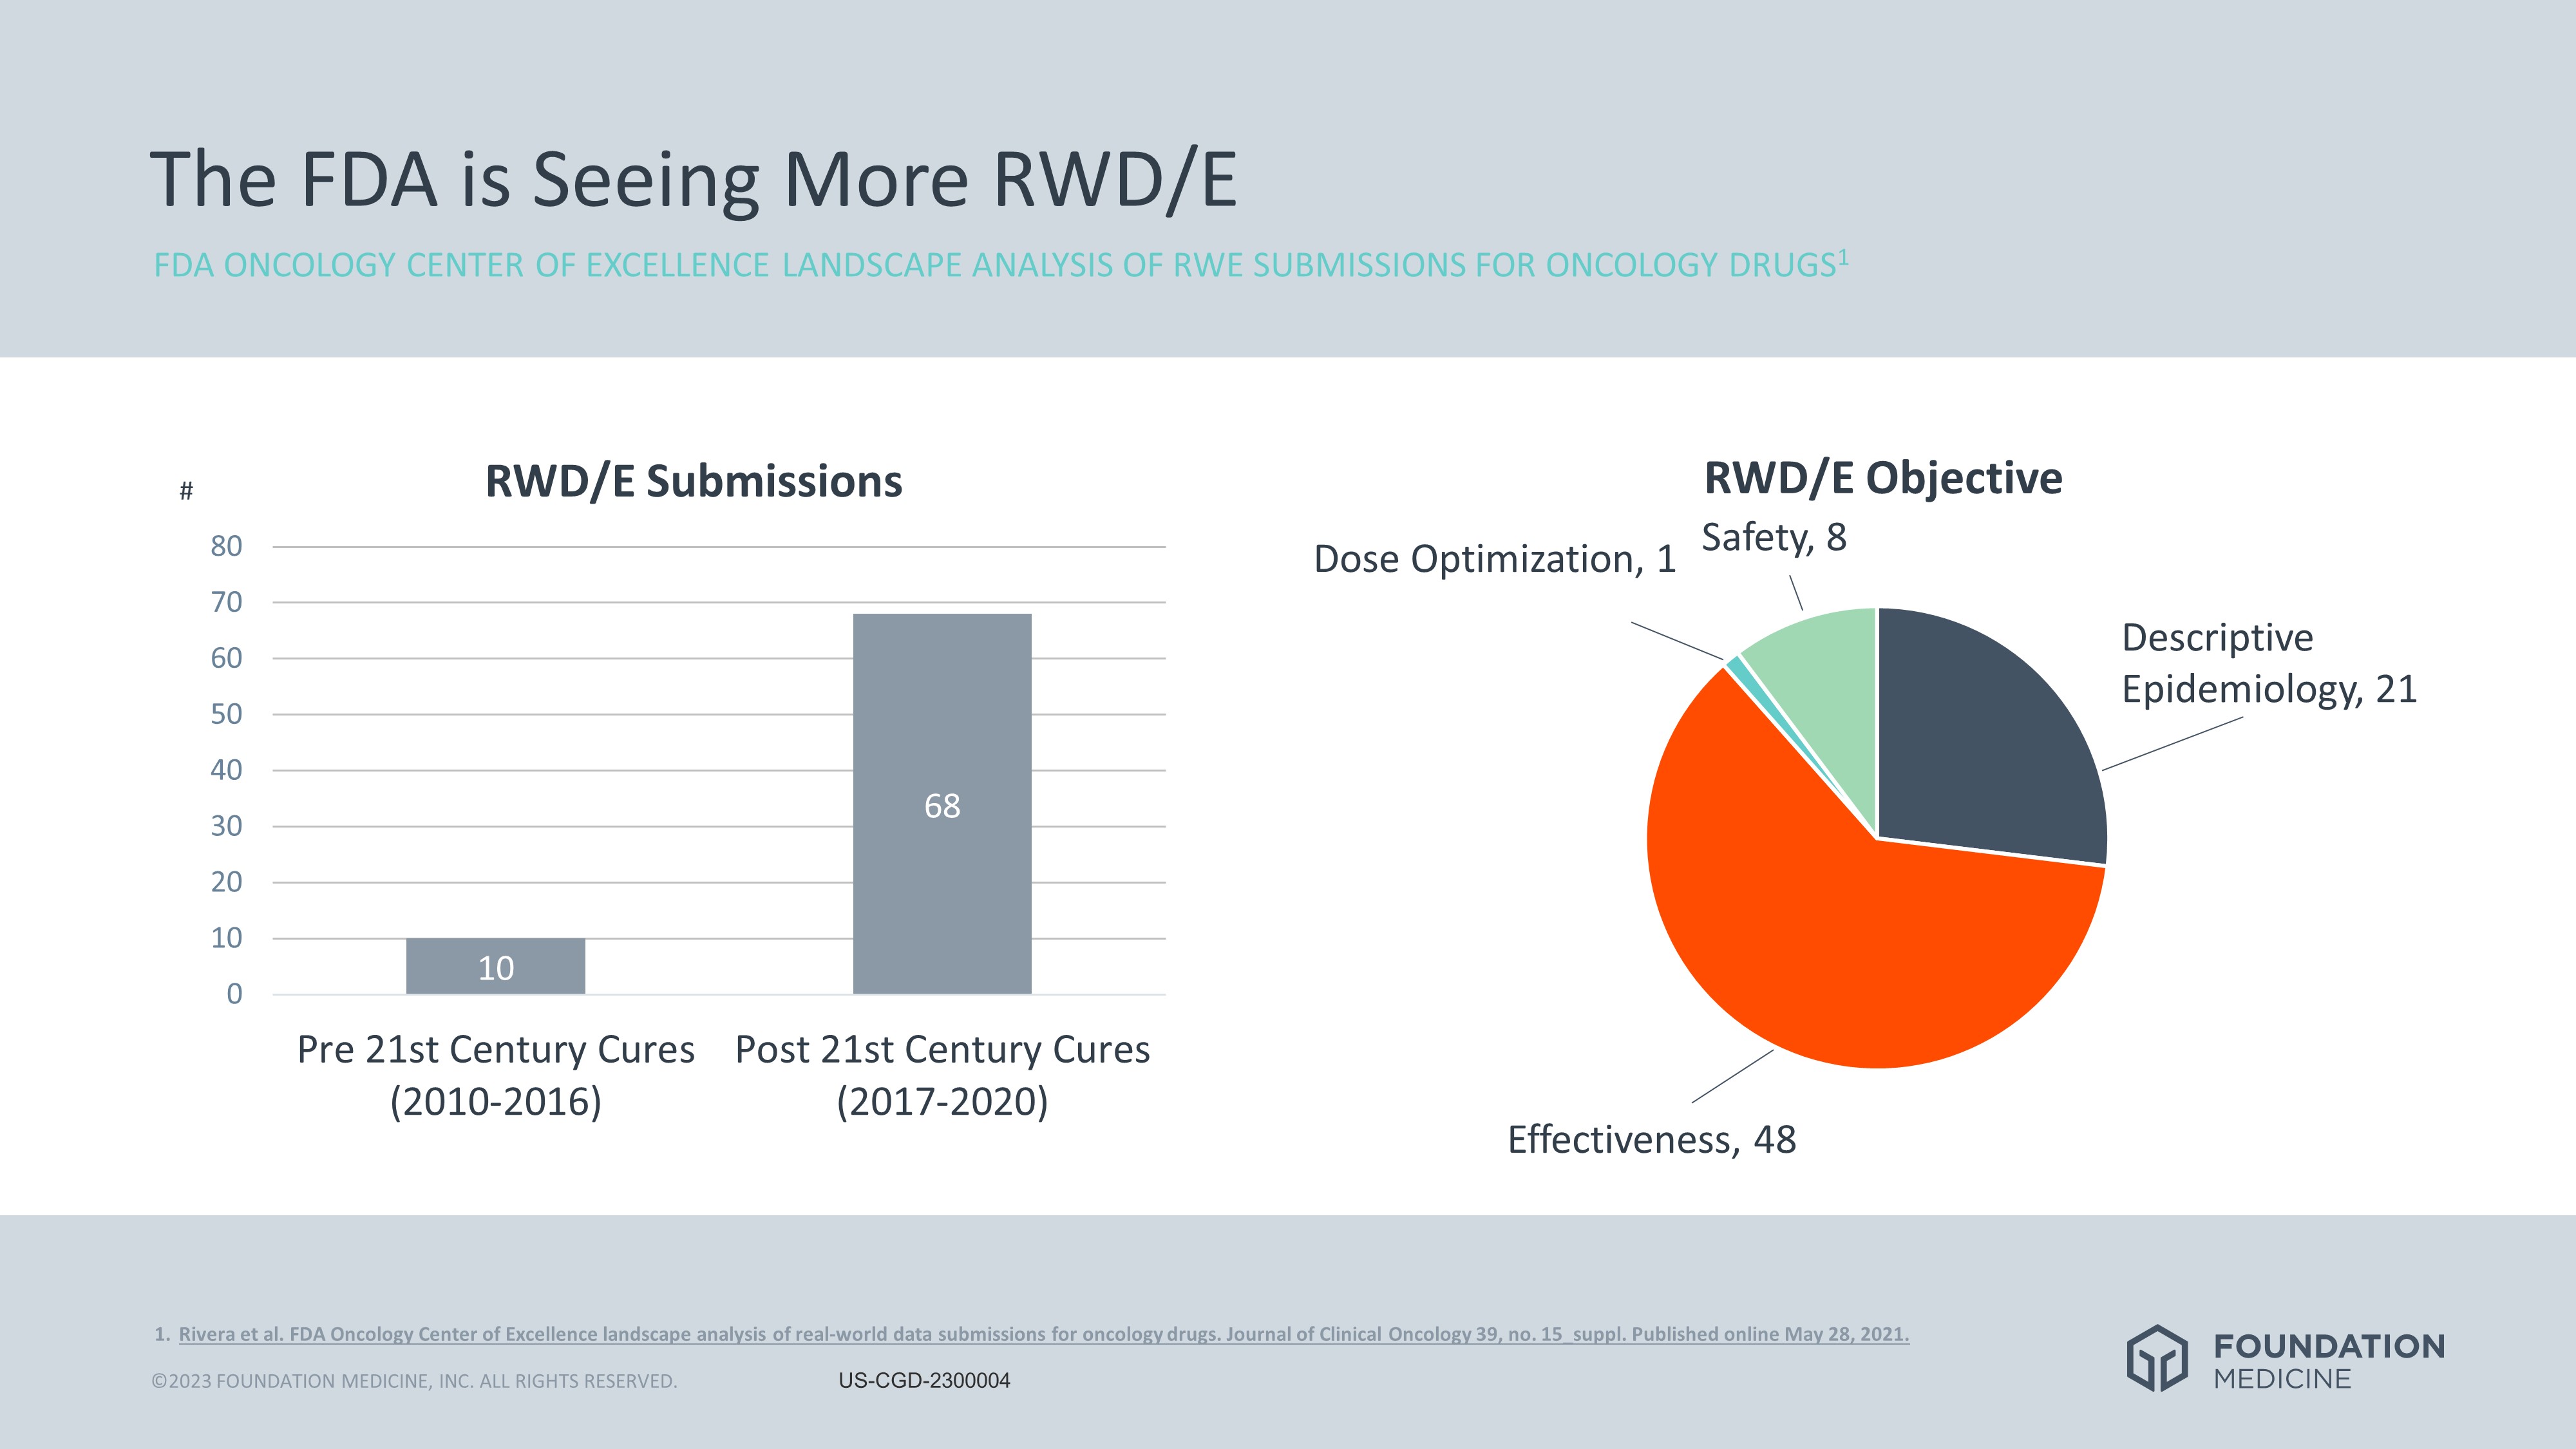 Graphs showing RWD/E submissions and objectives.